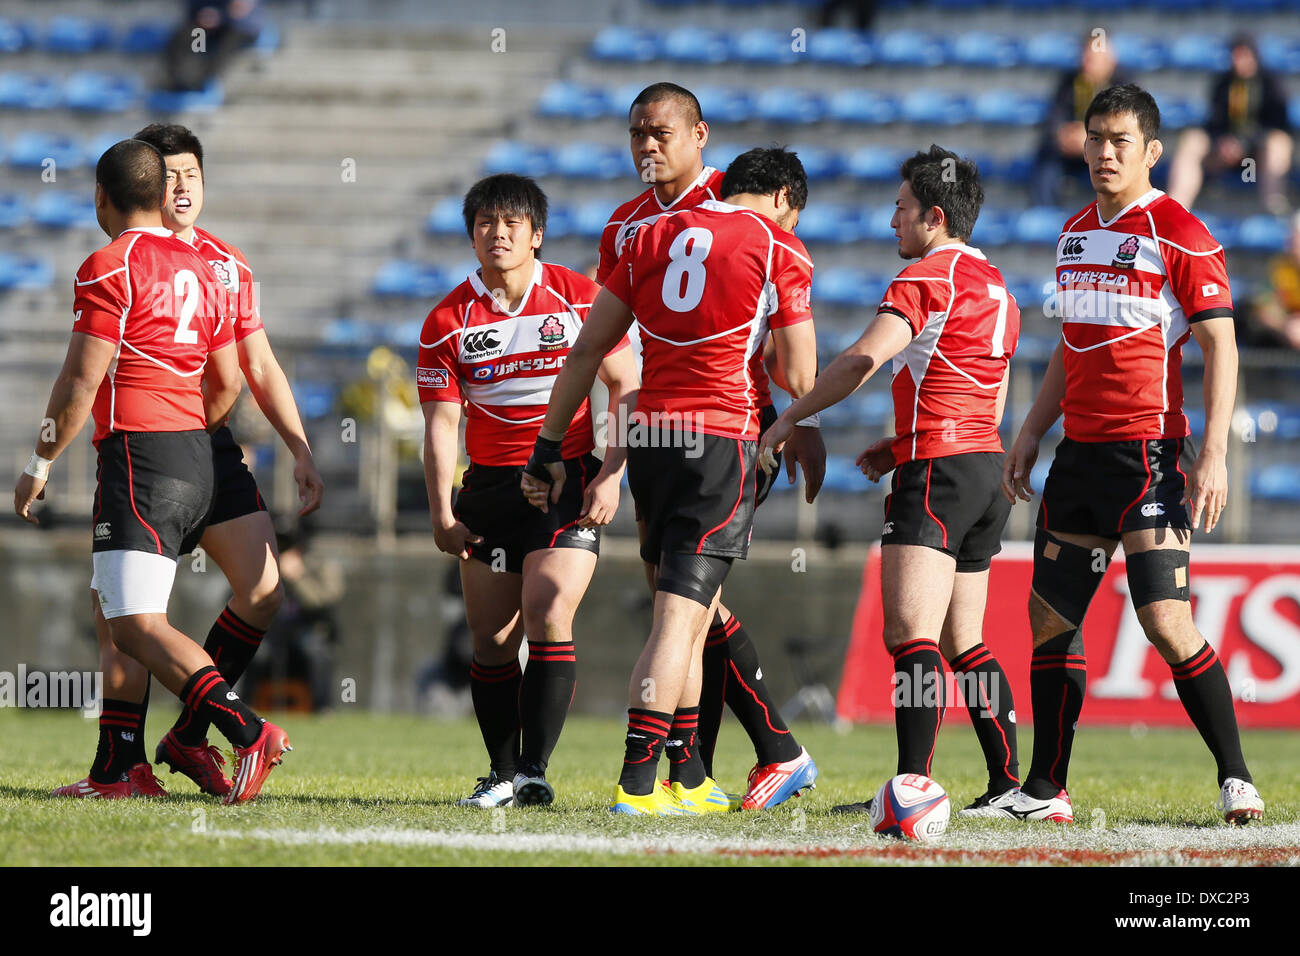 Tokyo, Giappone. 22 Mar, 2014. Giappone team group (JPN) Rugby : 2013-14 IRB Sevens World Series, Tokyo Sevens 2014, piscina stadio match tra Giappone 533 Sud Africa al Prince Chichibu Memorial Stadium a Tokyo in Giappone . © AFLO SPORT/Alamy Live News Foto Stock